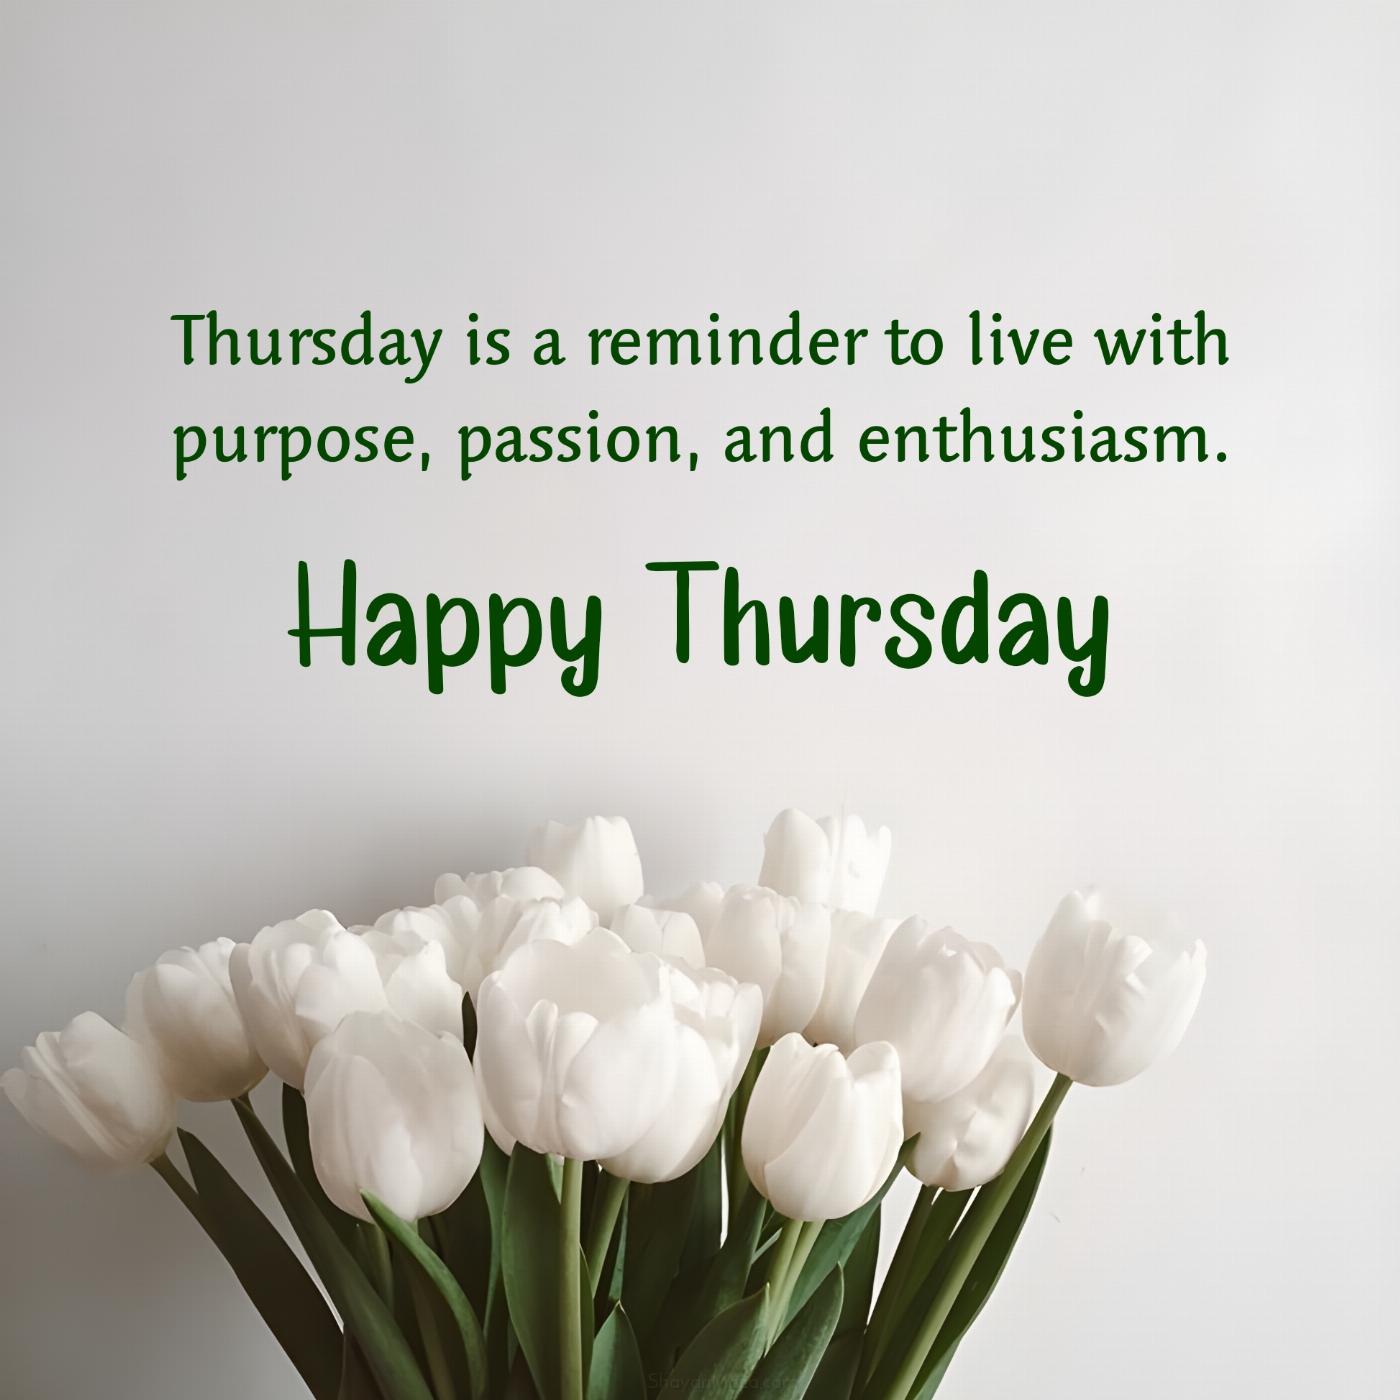 Thursday is a reminder to live with purpose passion